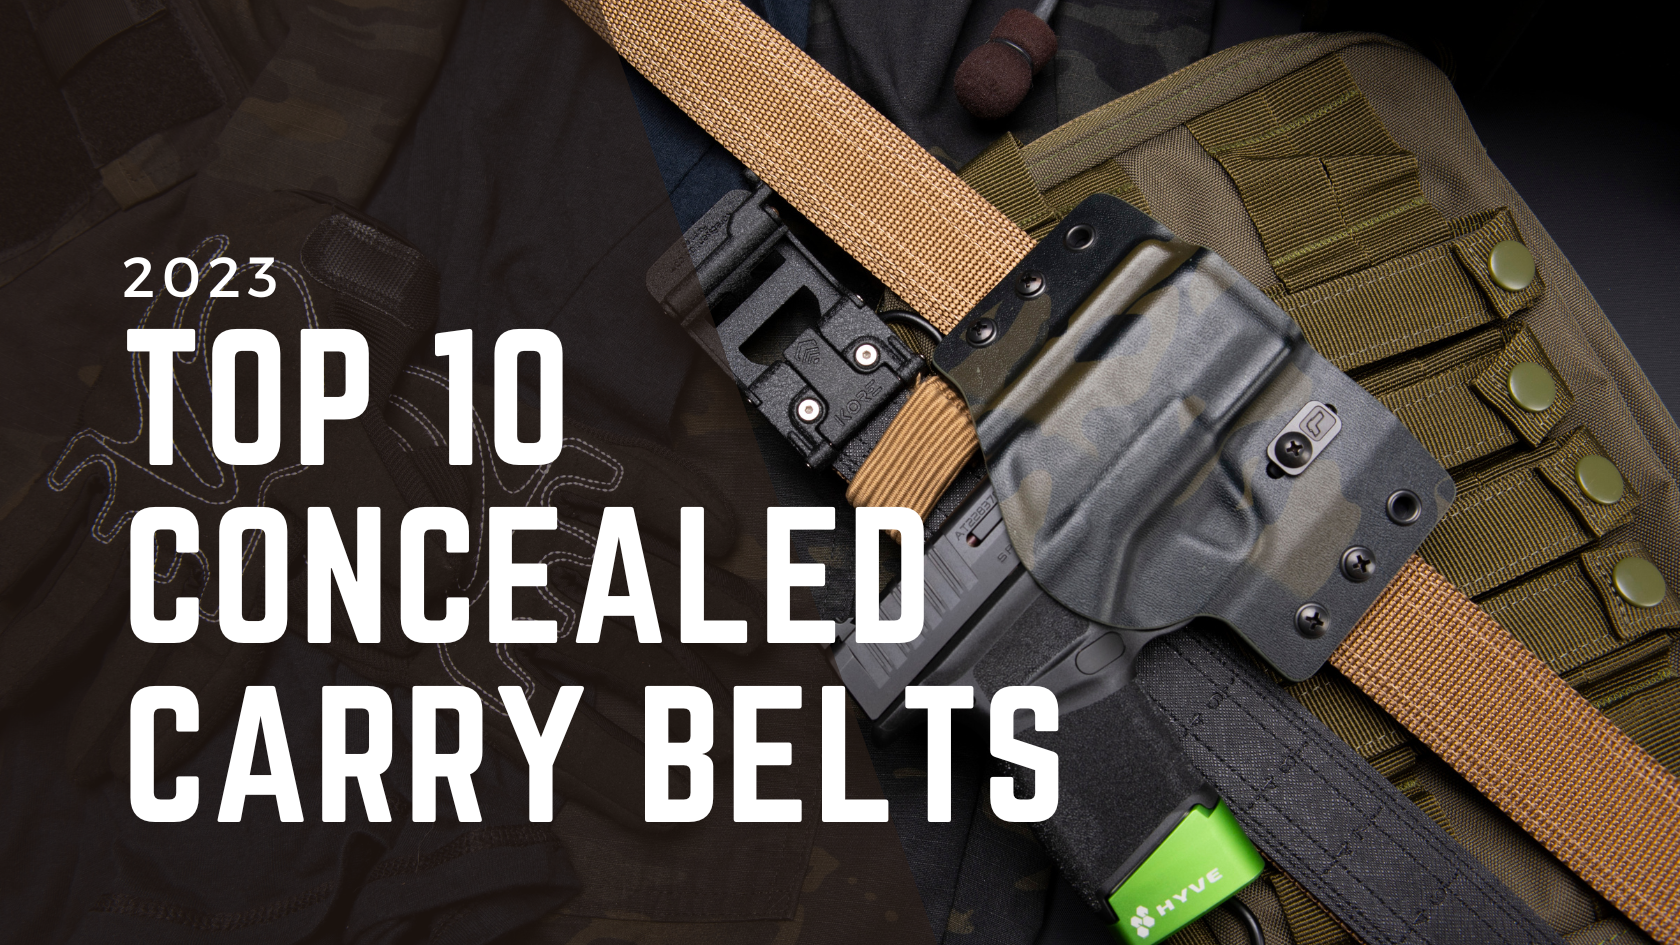 Top 10 Concealed Carry Belts in 2023 — duuude